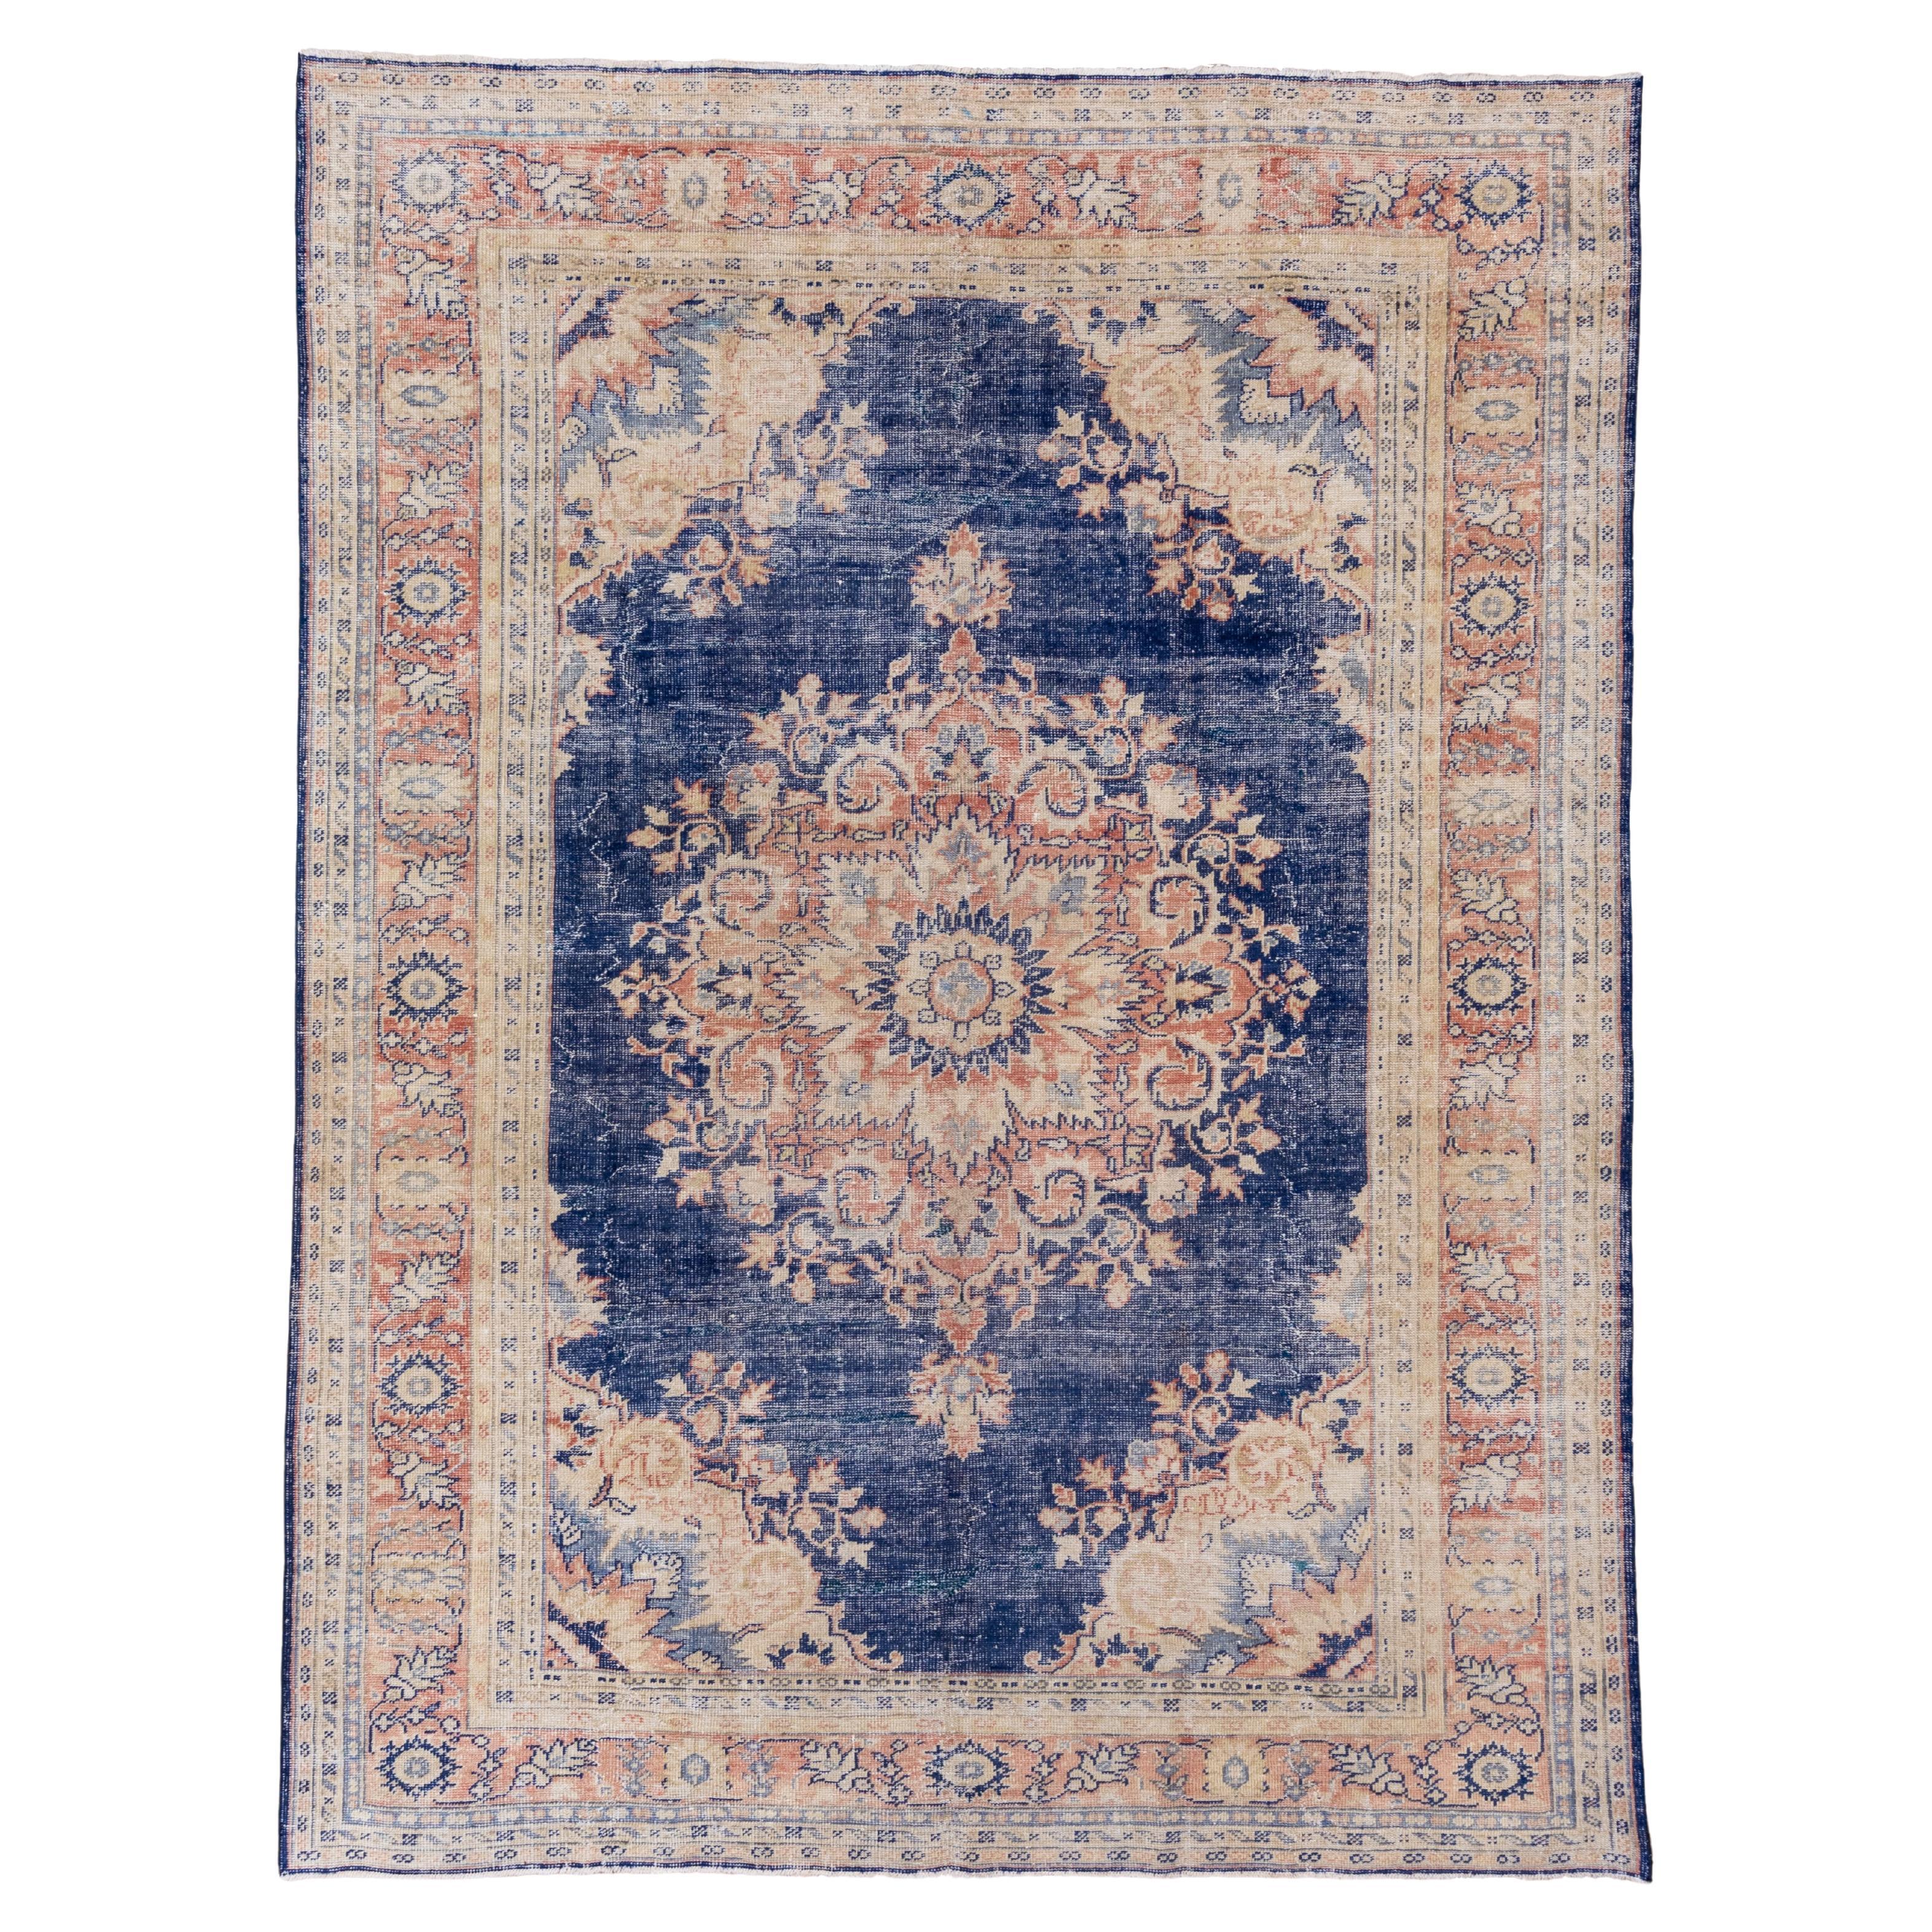 Eliko Rugs by David Ariel Shabby Chic Oushak Rug, Royal Blue Field For Sale